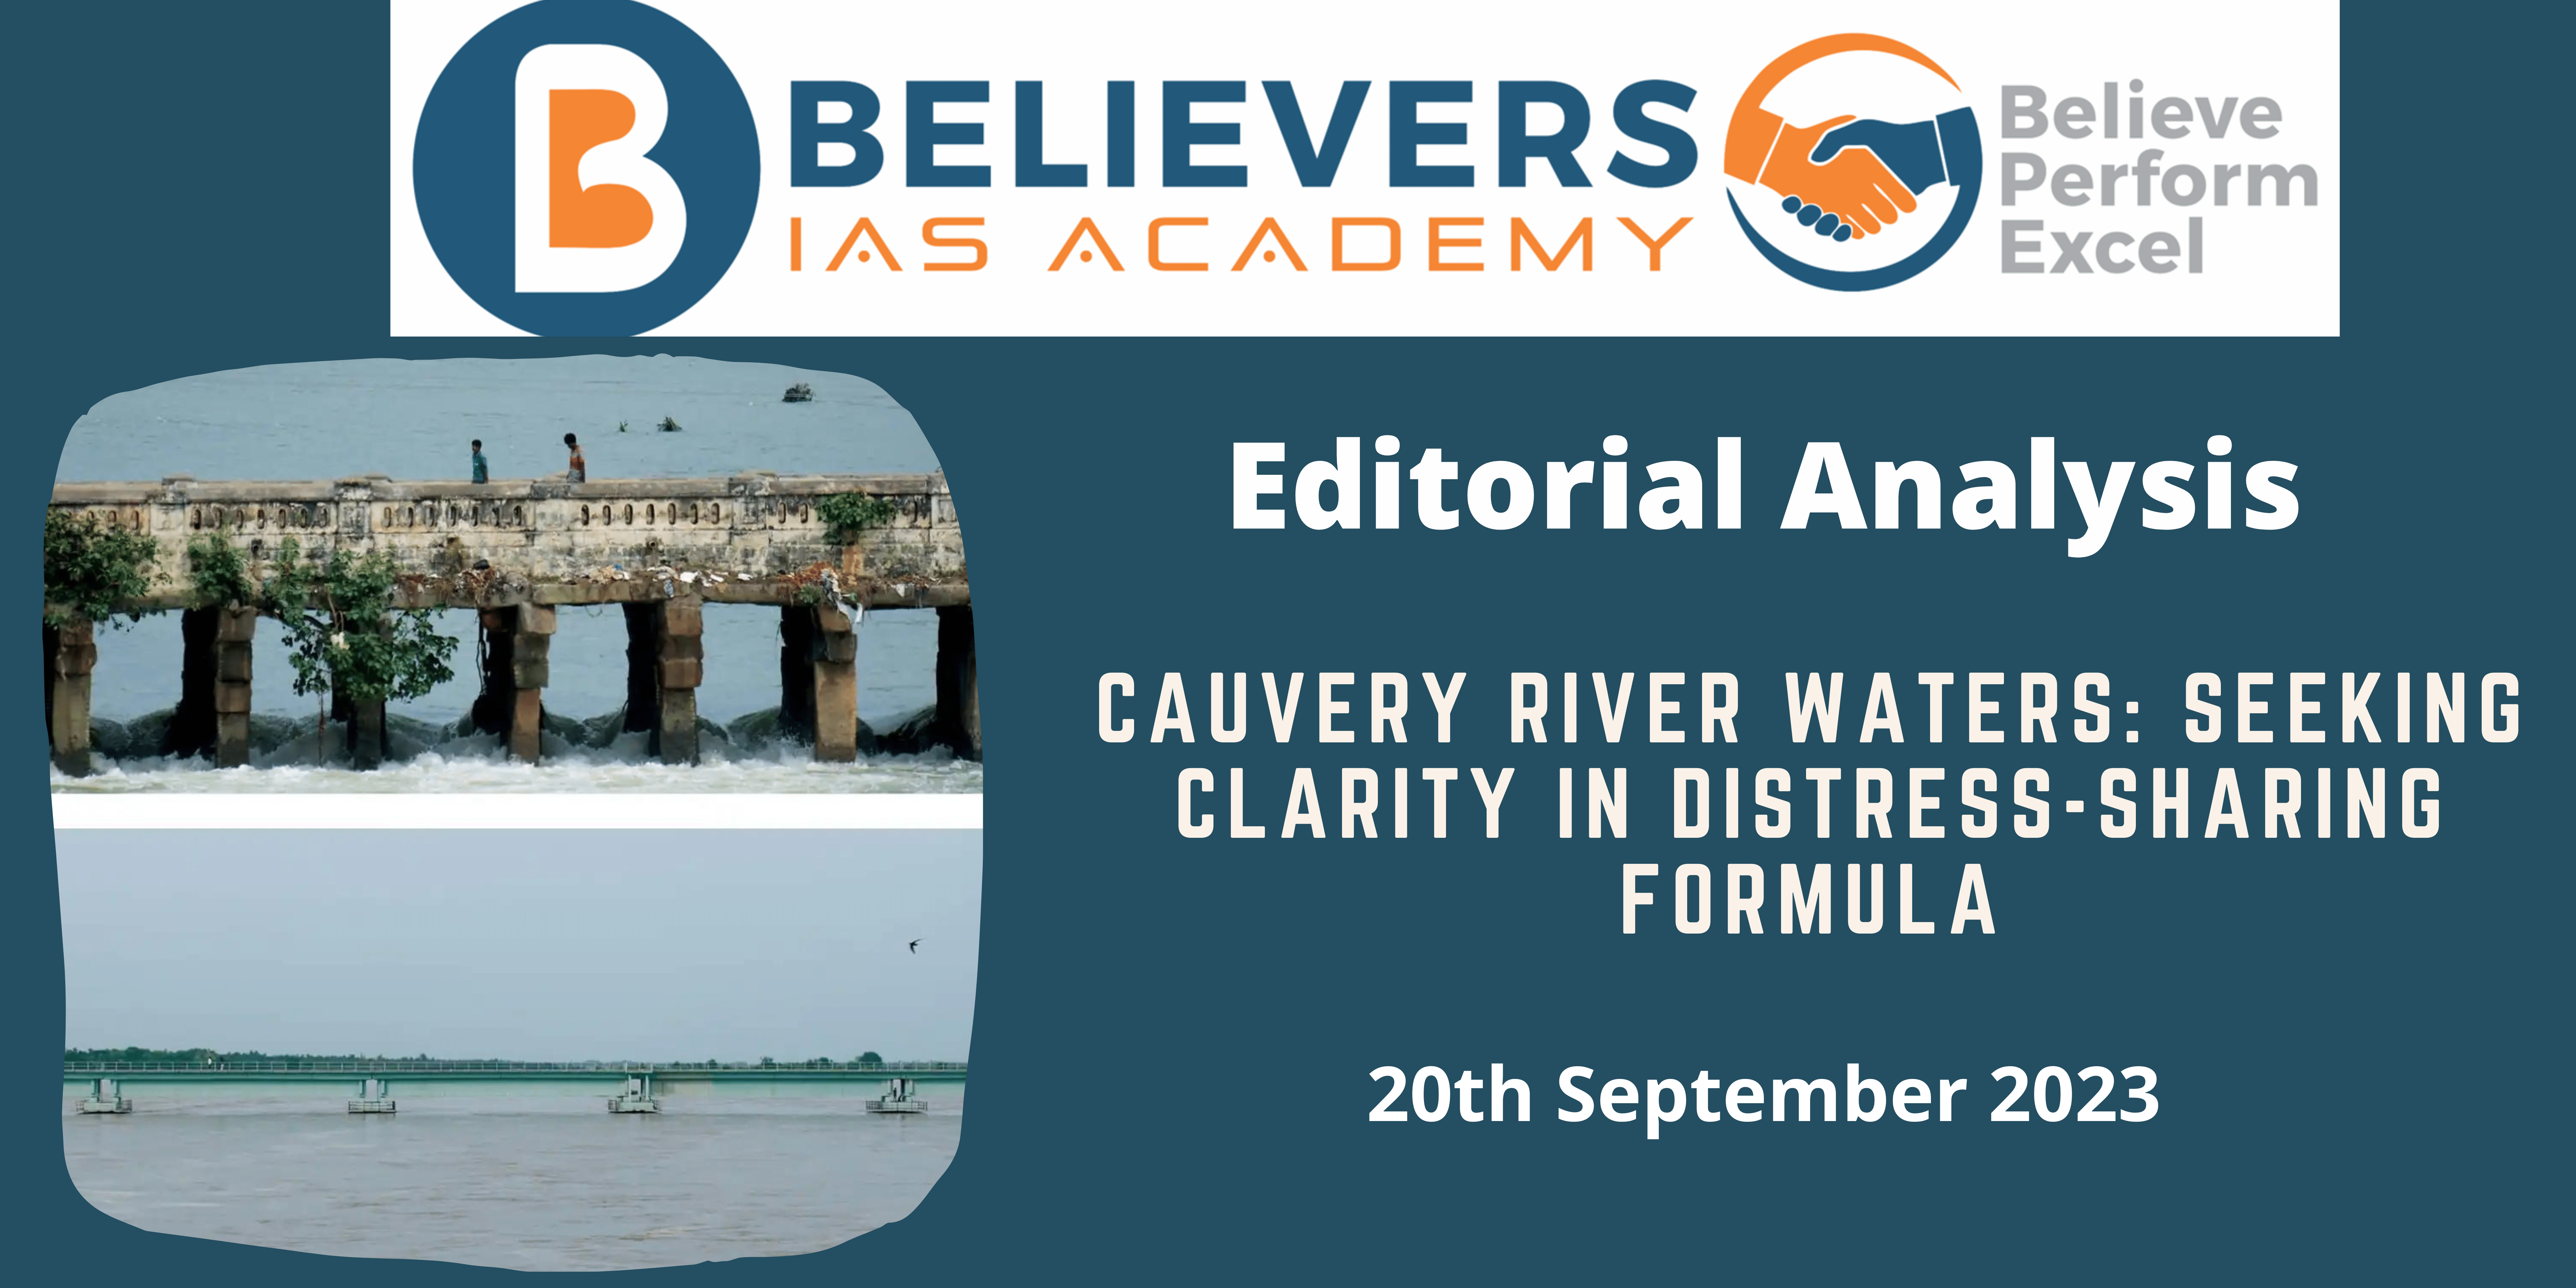 Cauvery River Waters: Seeking Clarity in Distress-Sharing Formula